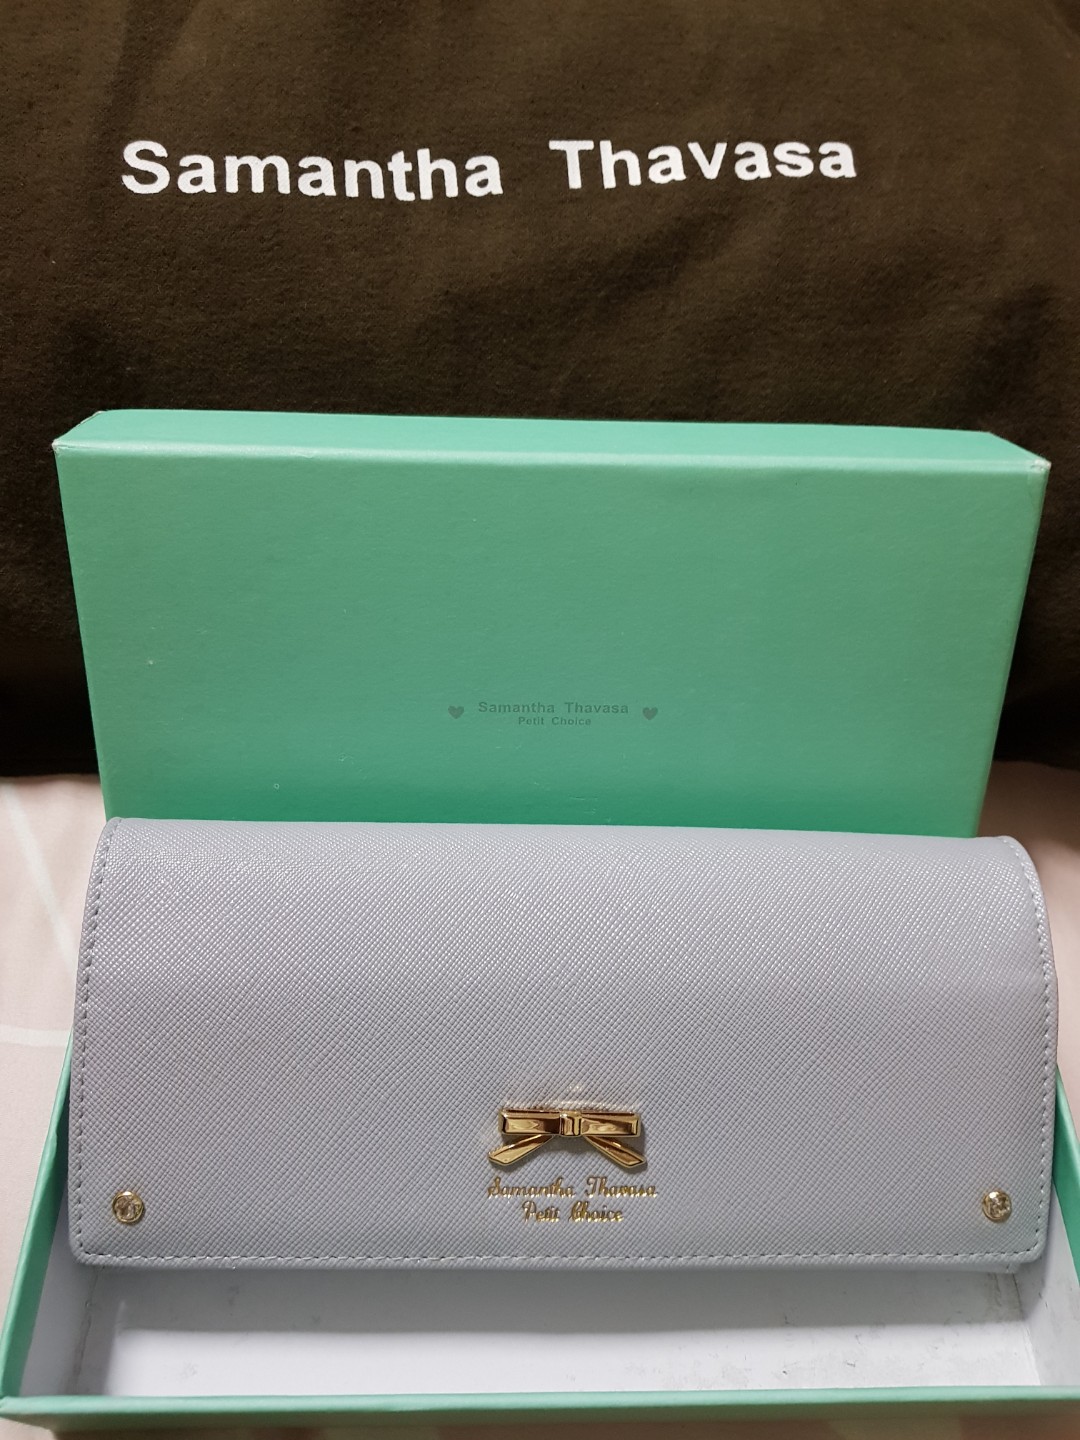 Price Reduced Samantha Thavasa Petit Choice Long Wallet Women S Fashion Bags Wallets Wallets Card Holders On Carousell